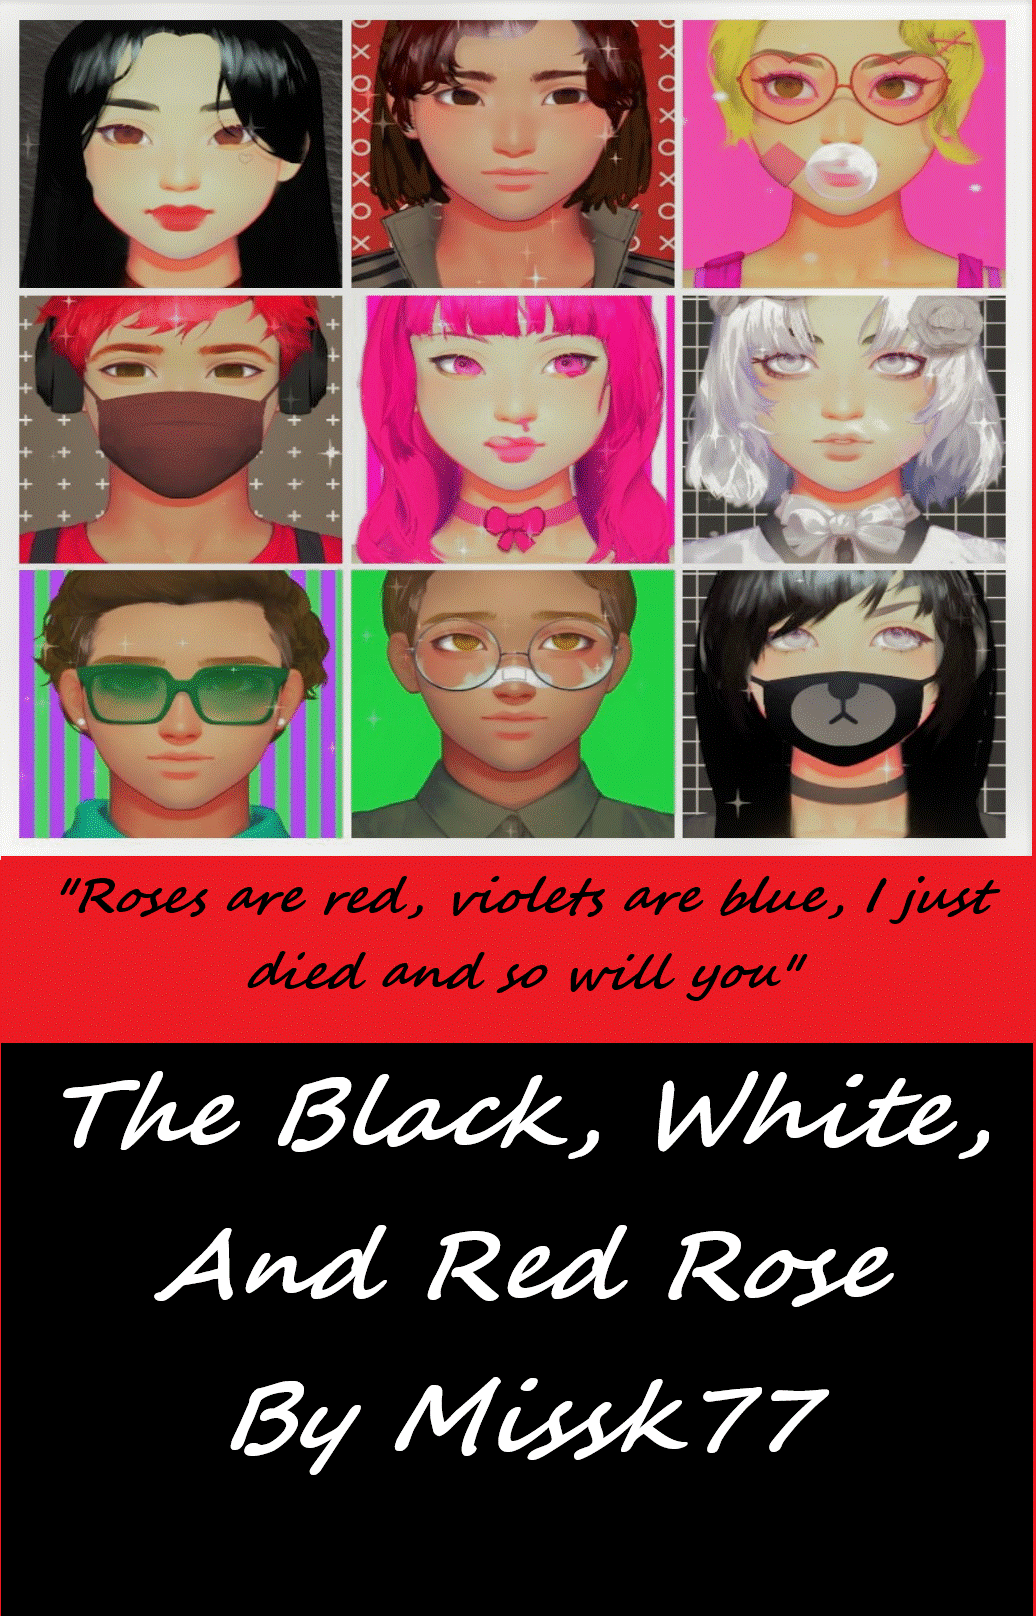 The Black, White, And Red Rose